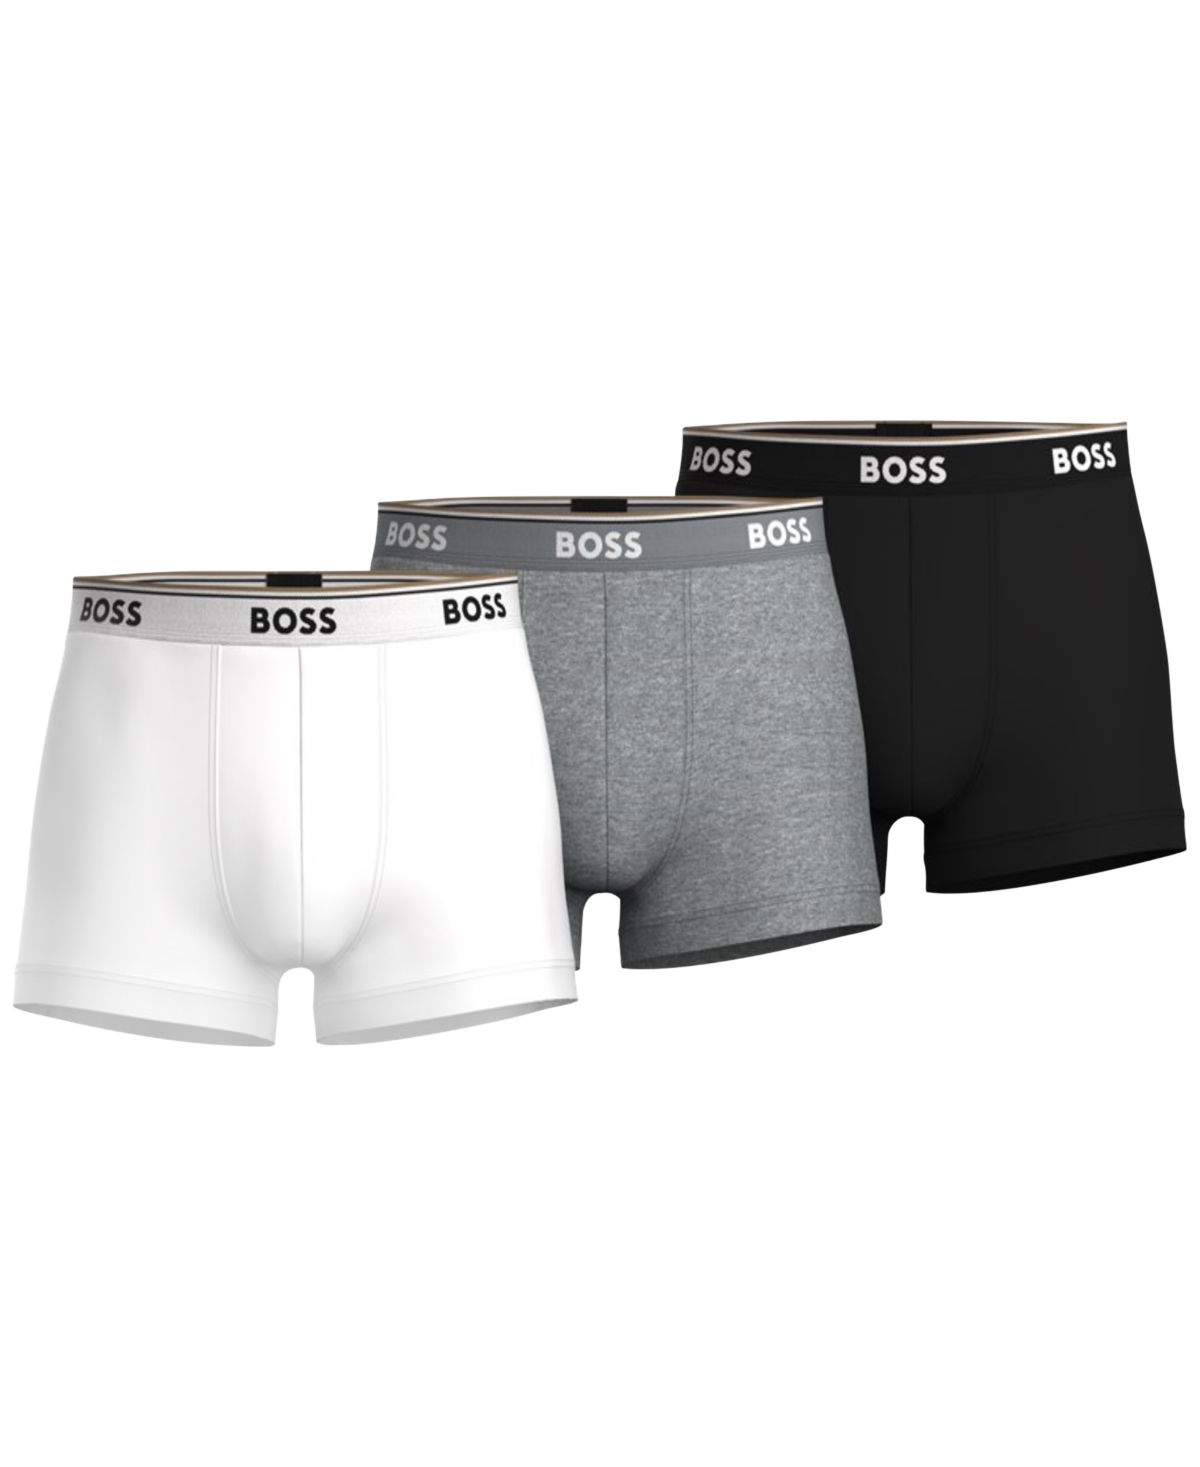 Boss by Hugo Boss Men's 3-Pk. Power Stretch Assorted Color Solid Trunks - Assorted